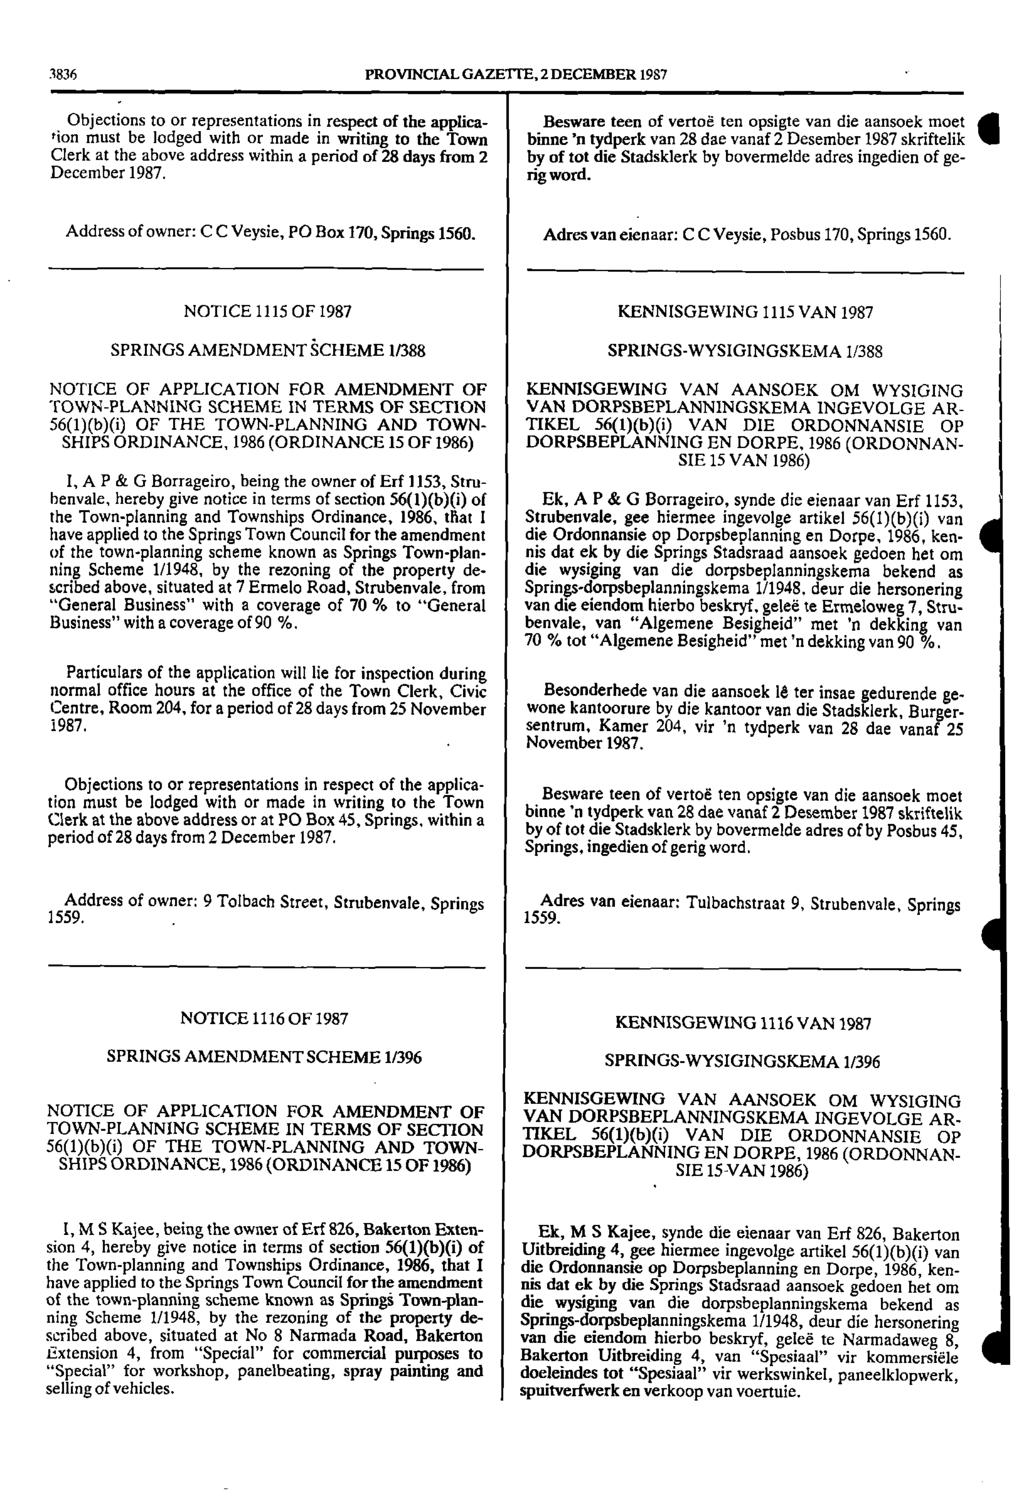 3836 PROVINCIAL GAZETTE, 2 DECEMBER 1987 Objections to or representations in respect of the application must be lodged with or made in writing to the Town Clerk at the above address within a period